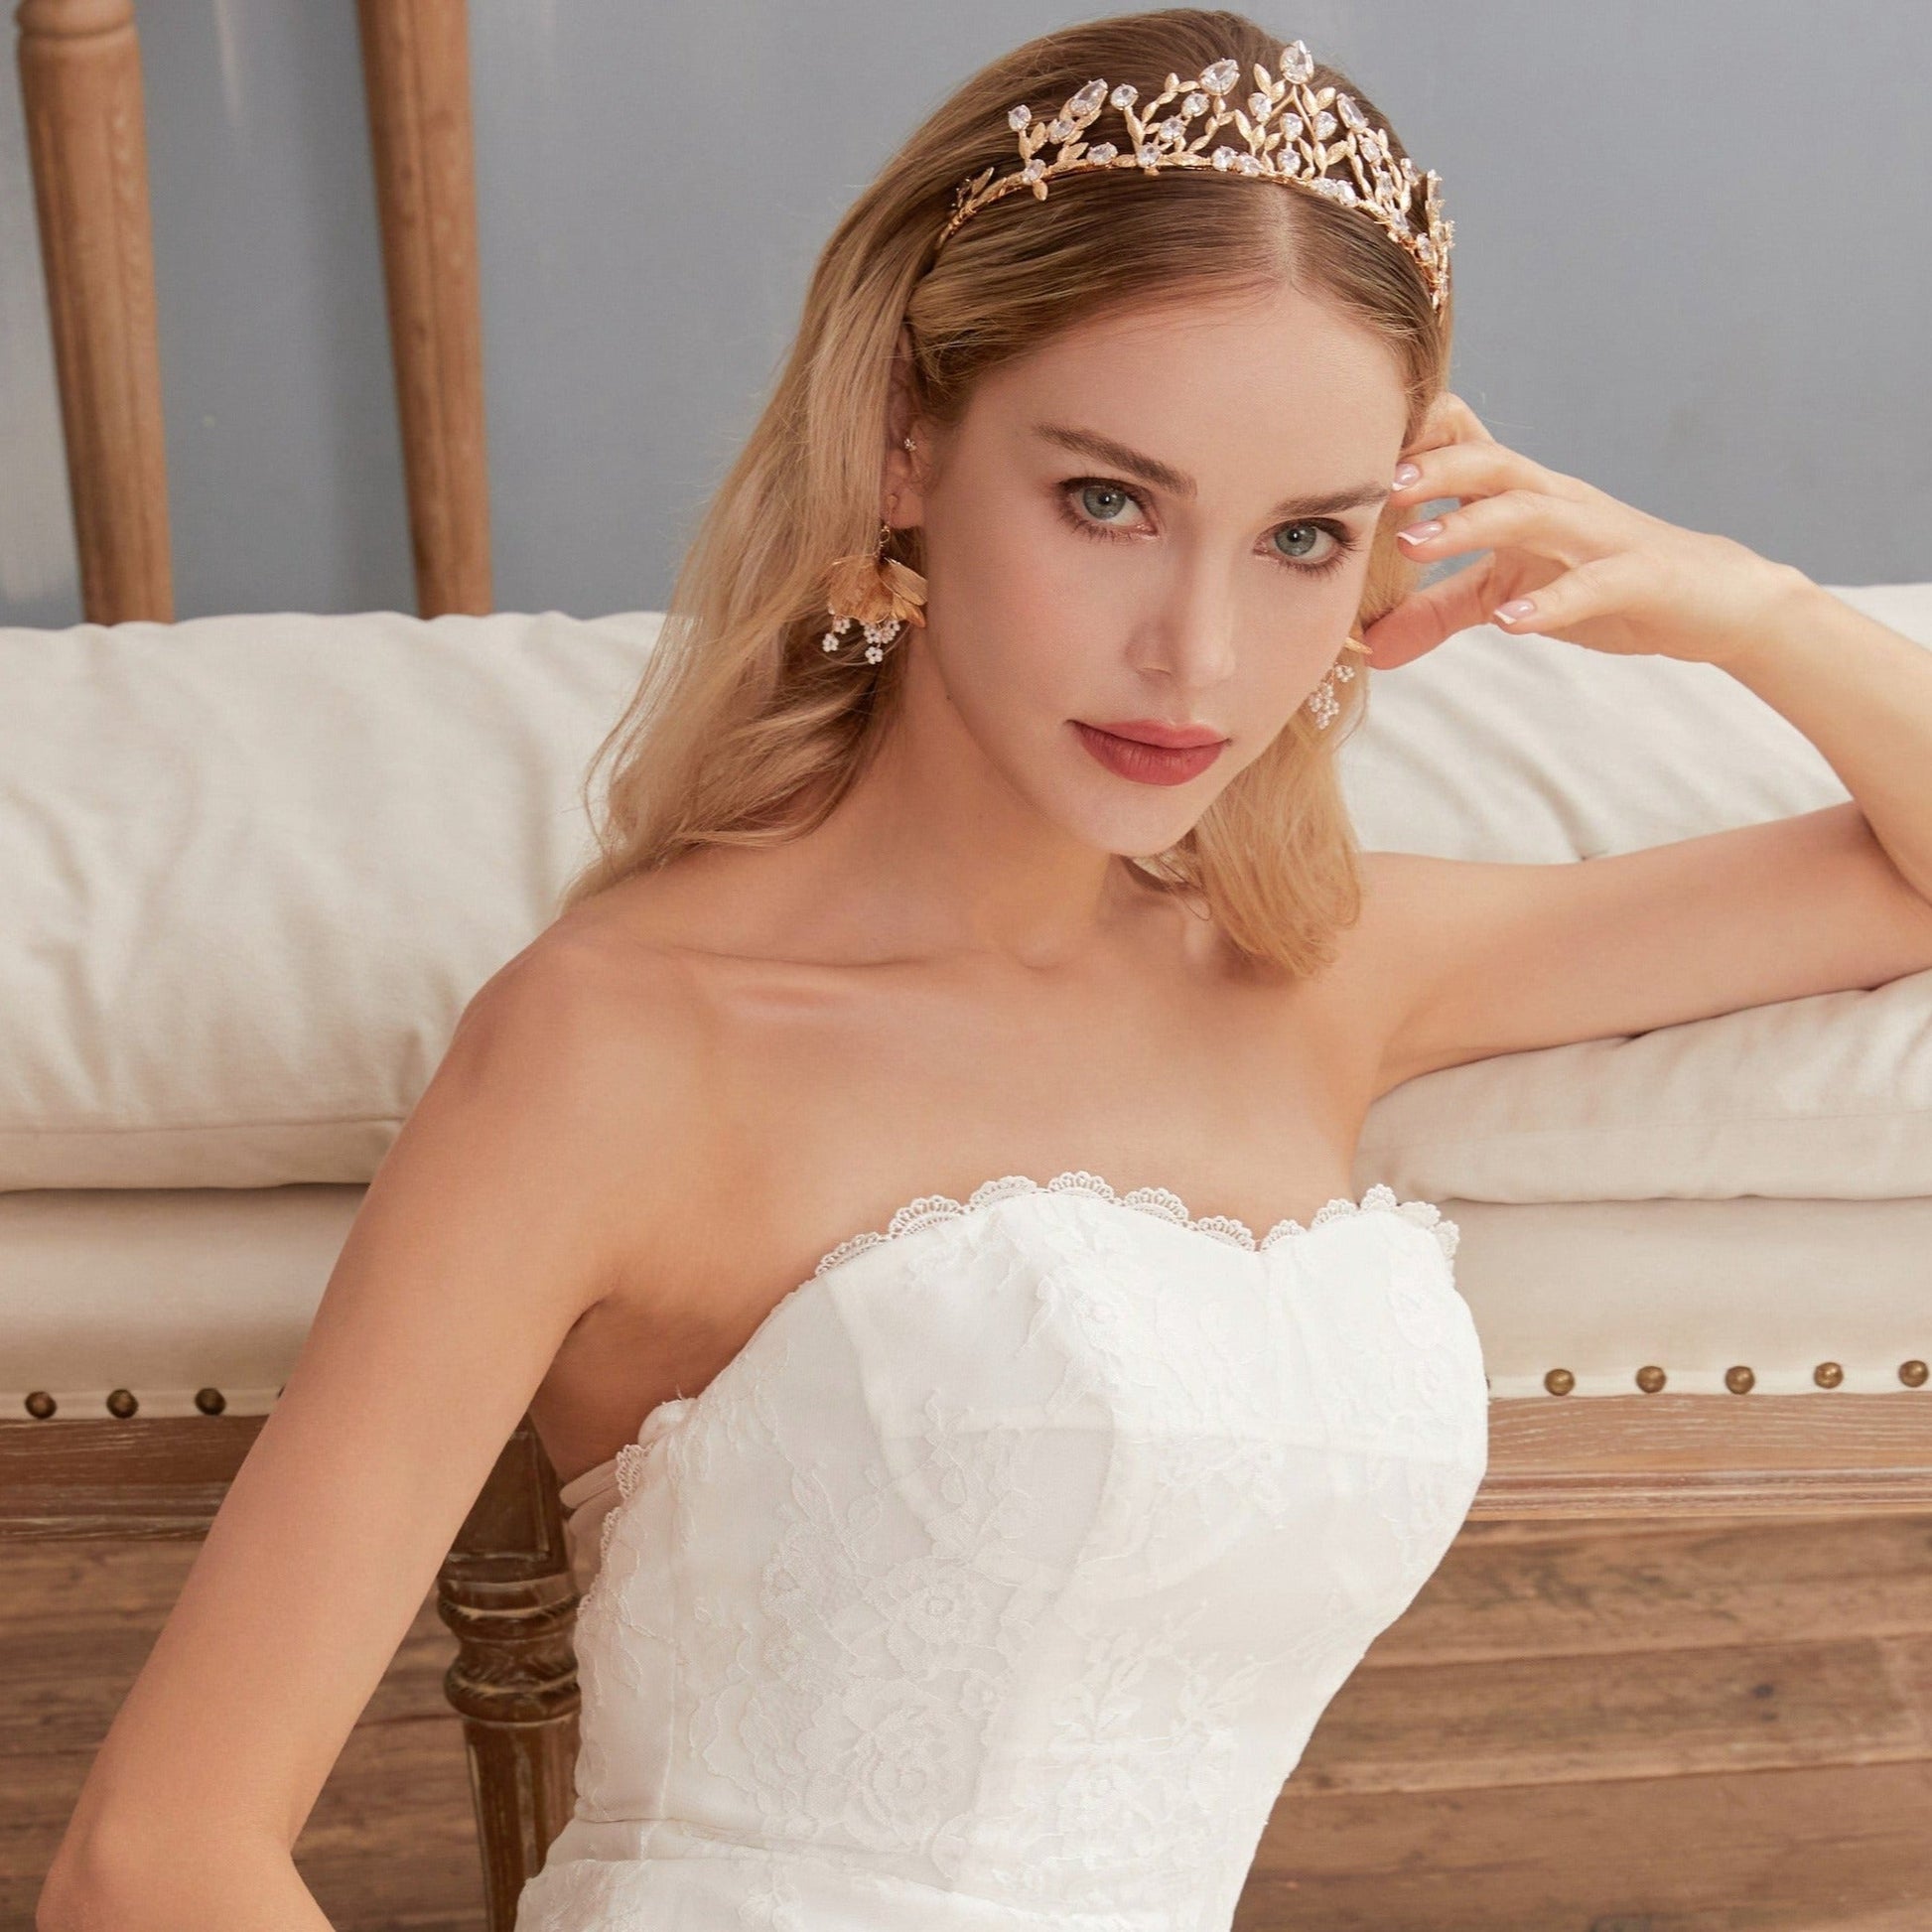 Victoria | Gold Crystal Bridal Crown Tiara - Handcrafted with attention to detail, this unique crown features delicate gold metal leaves intricately arranged alongside an array of dazzling rhinestone flowers in various sizes. The combination of gold and crystals creates a vintage-inspired woodland feel. 